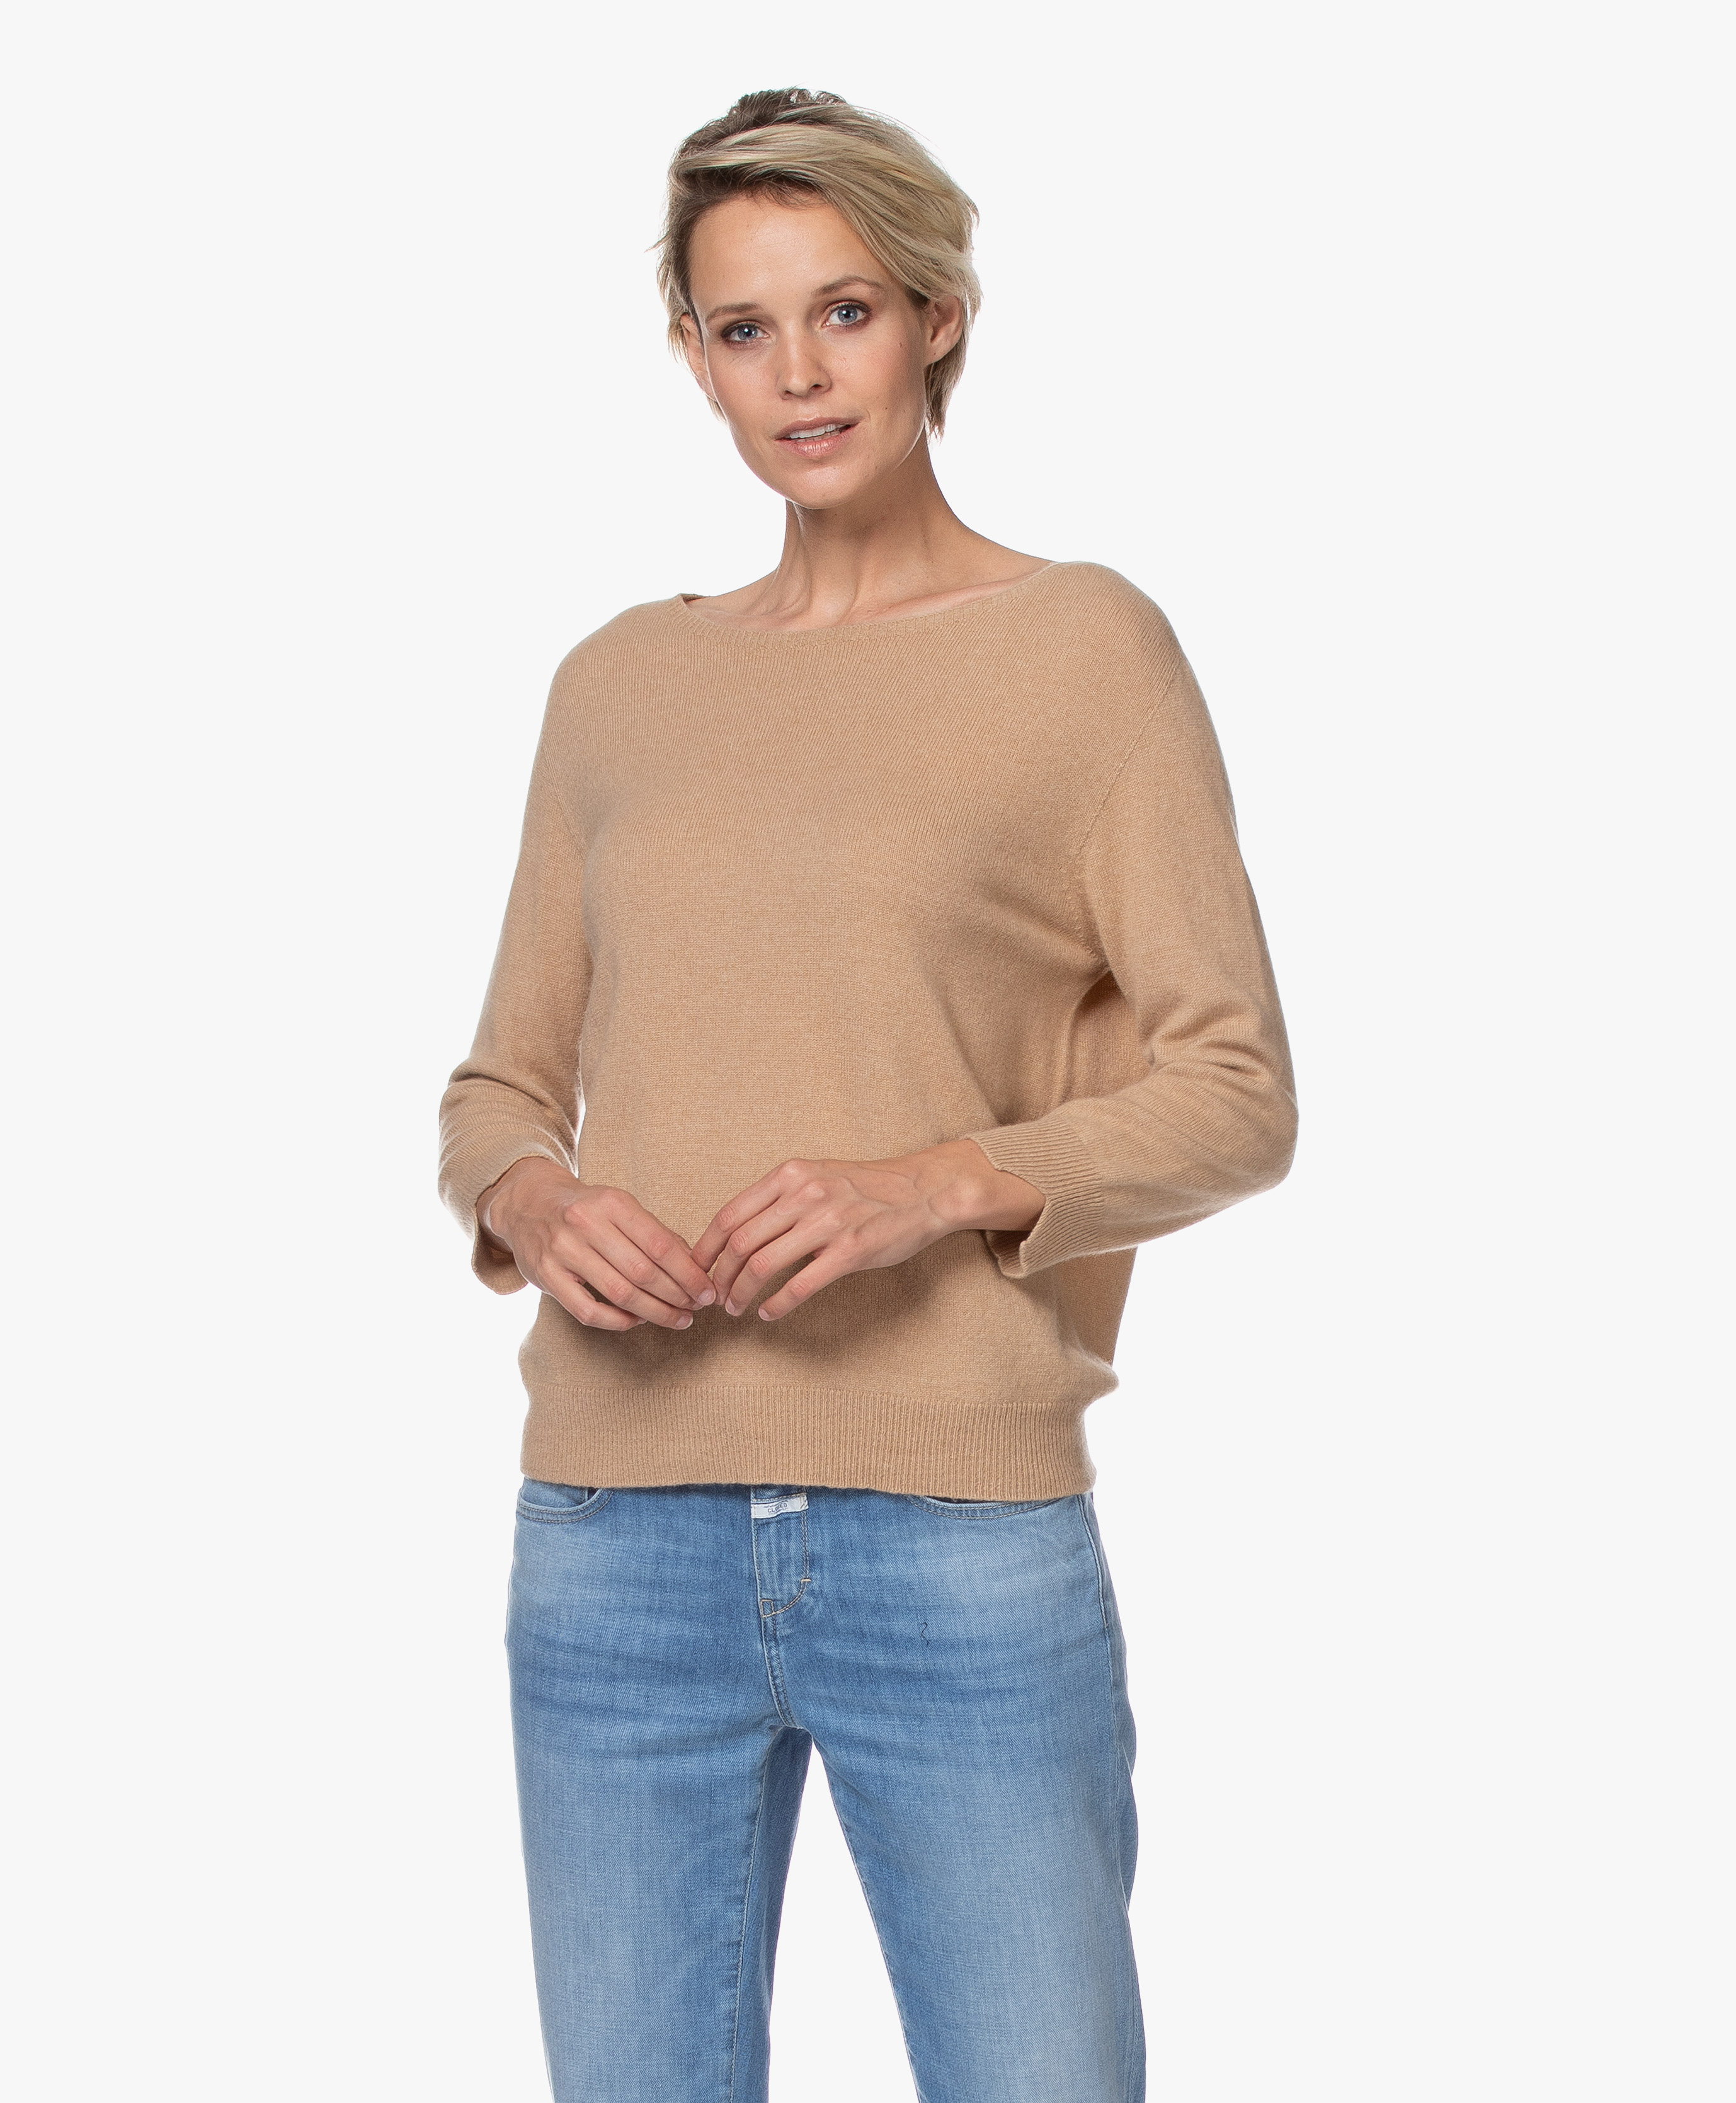 LaSalle Cashmere Cropped Sleeve Pullover - Sand - pm.01 sand